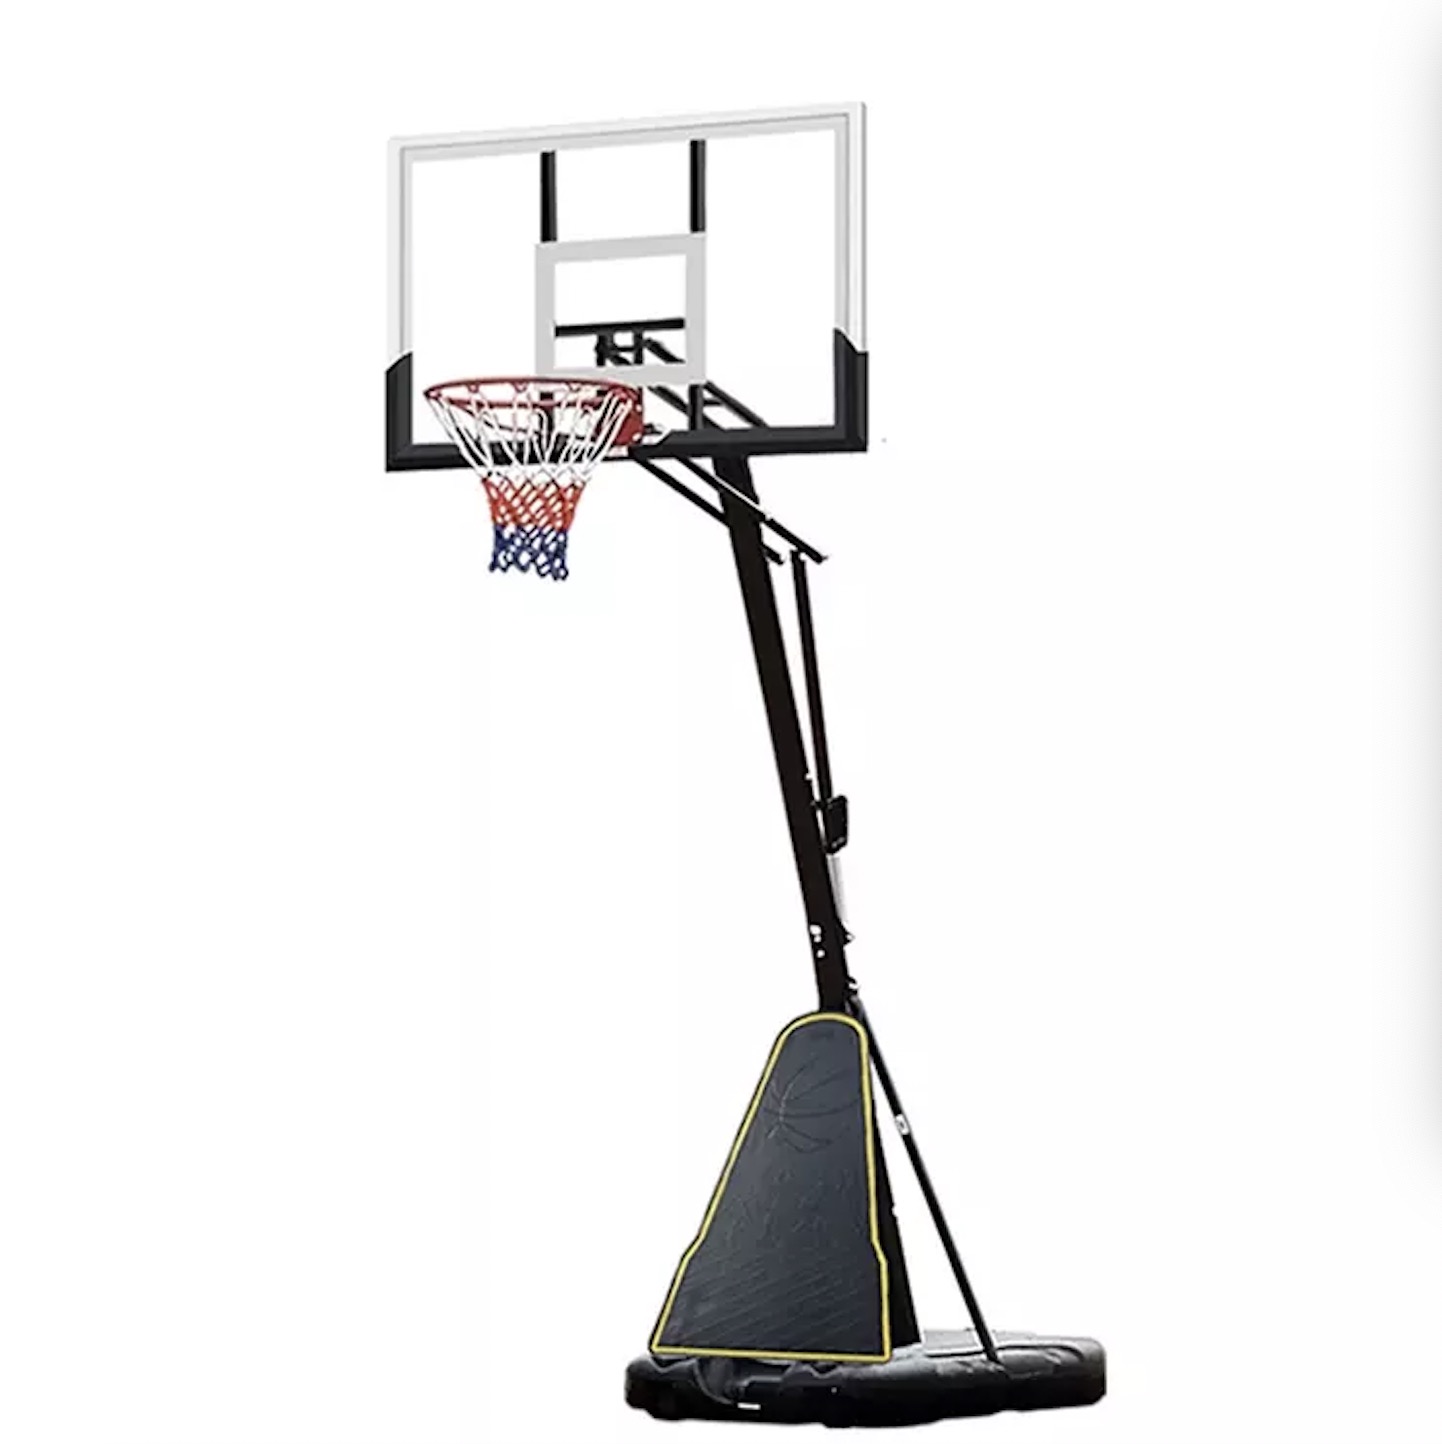 54'' backboard Tempered glass Dunk Basketball hoop Basketball stand 5v5 competition Street basketball Outdoor movable